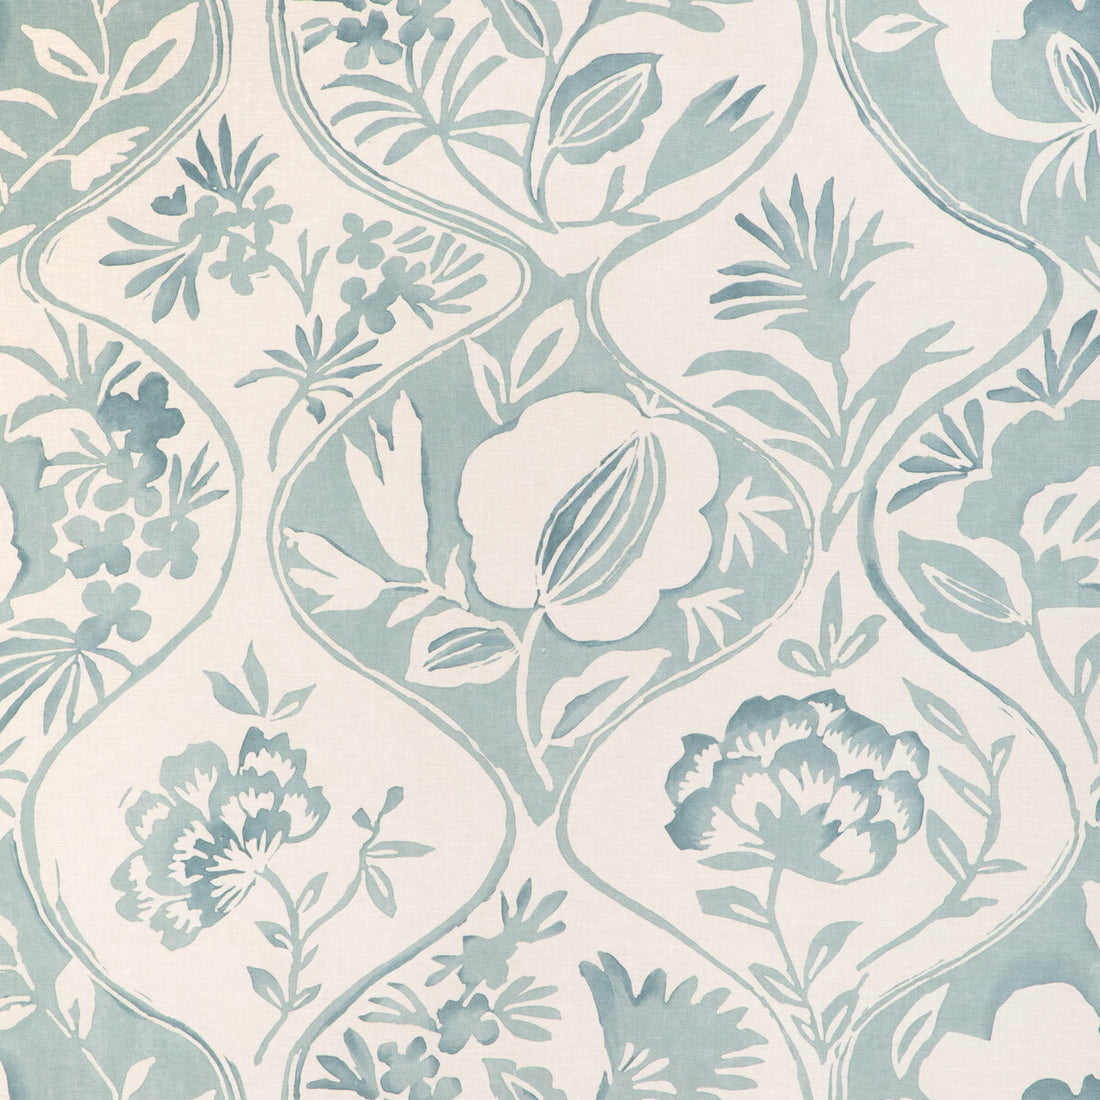 Calathea Print fabric in aqua color - pattern 2023141.13.0 - by Lee Jofa in the Garden Walk collection